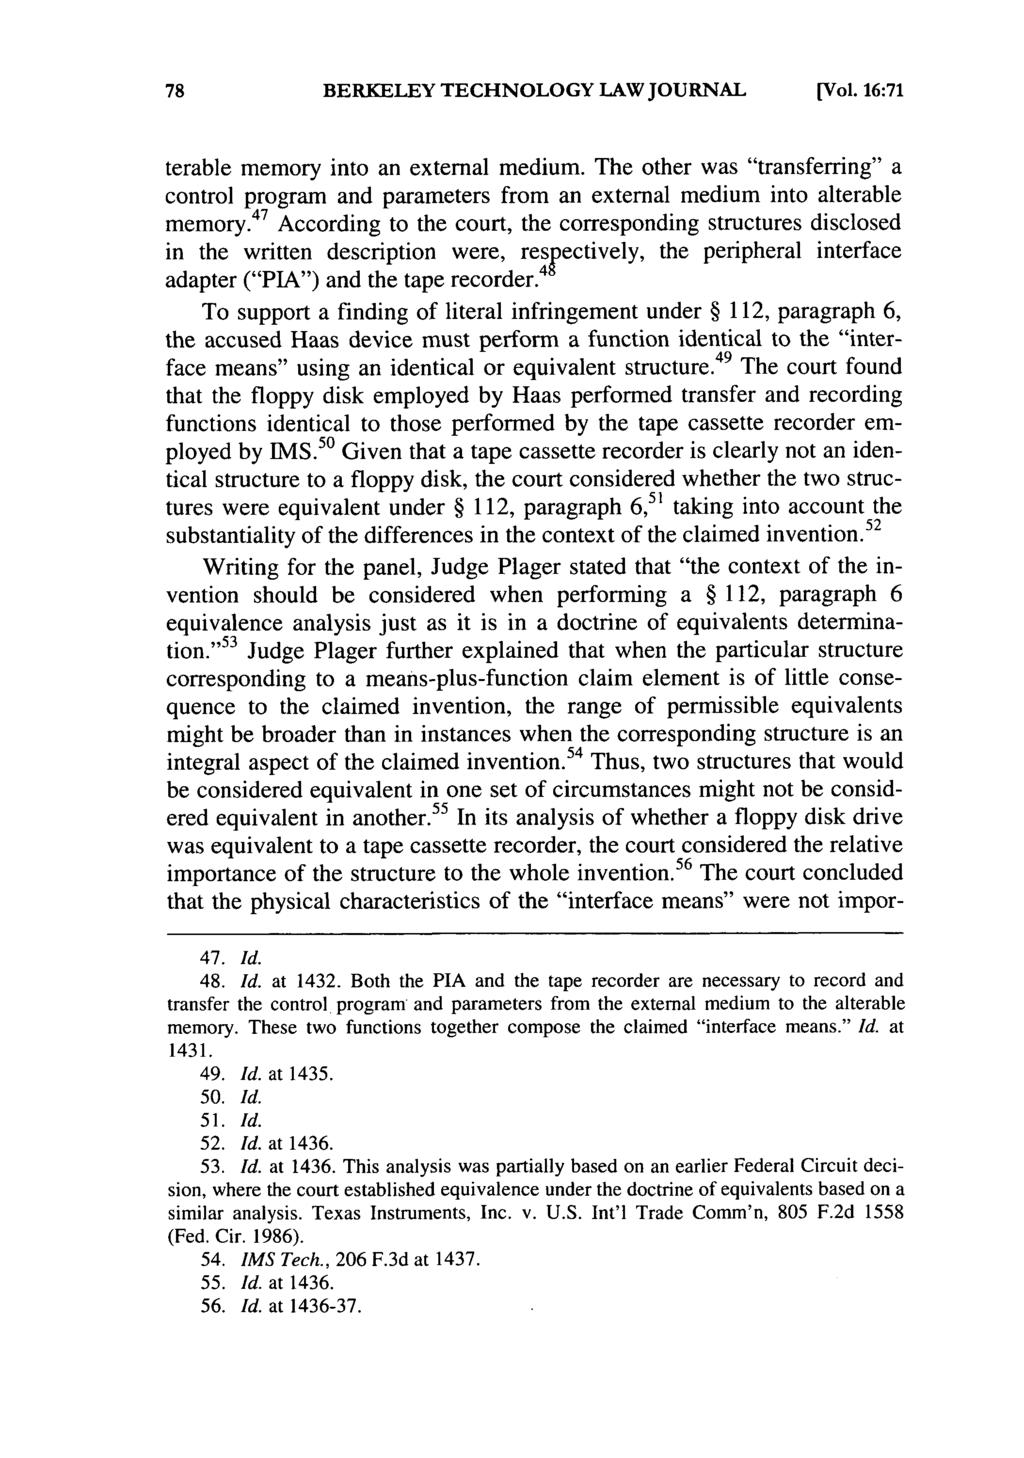 BERKELEY TECHNOLOGY LAW JOURNAL [Vol. 16:71 terable memory into an external medium. The other was "transferring" a control program and parameters from an external medium into alterable memory.